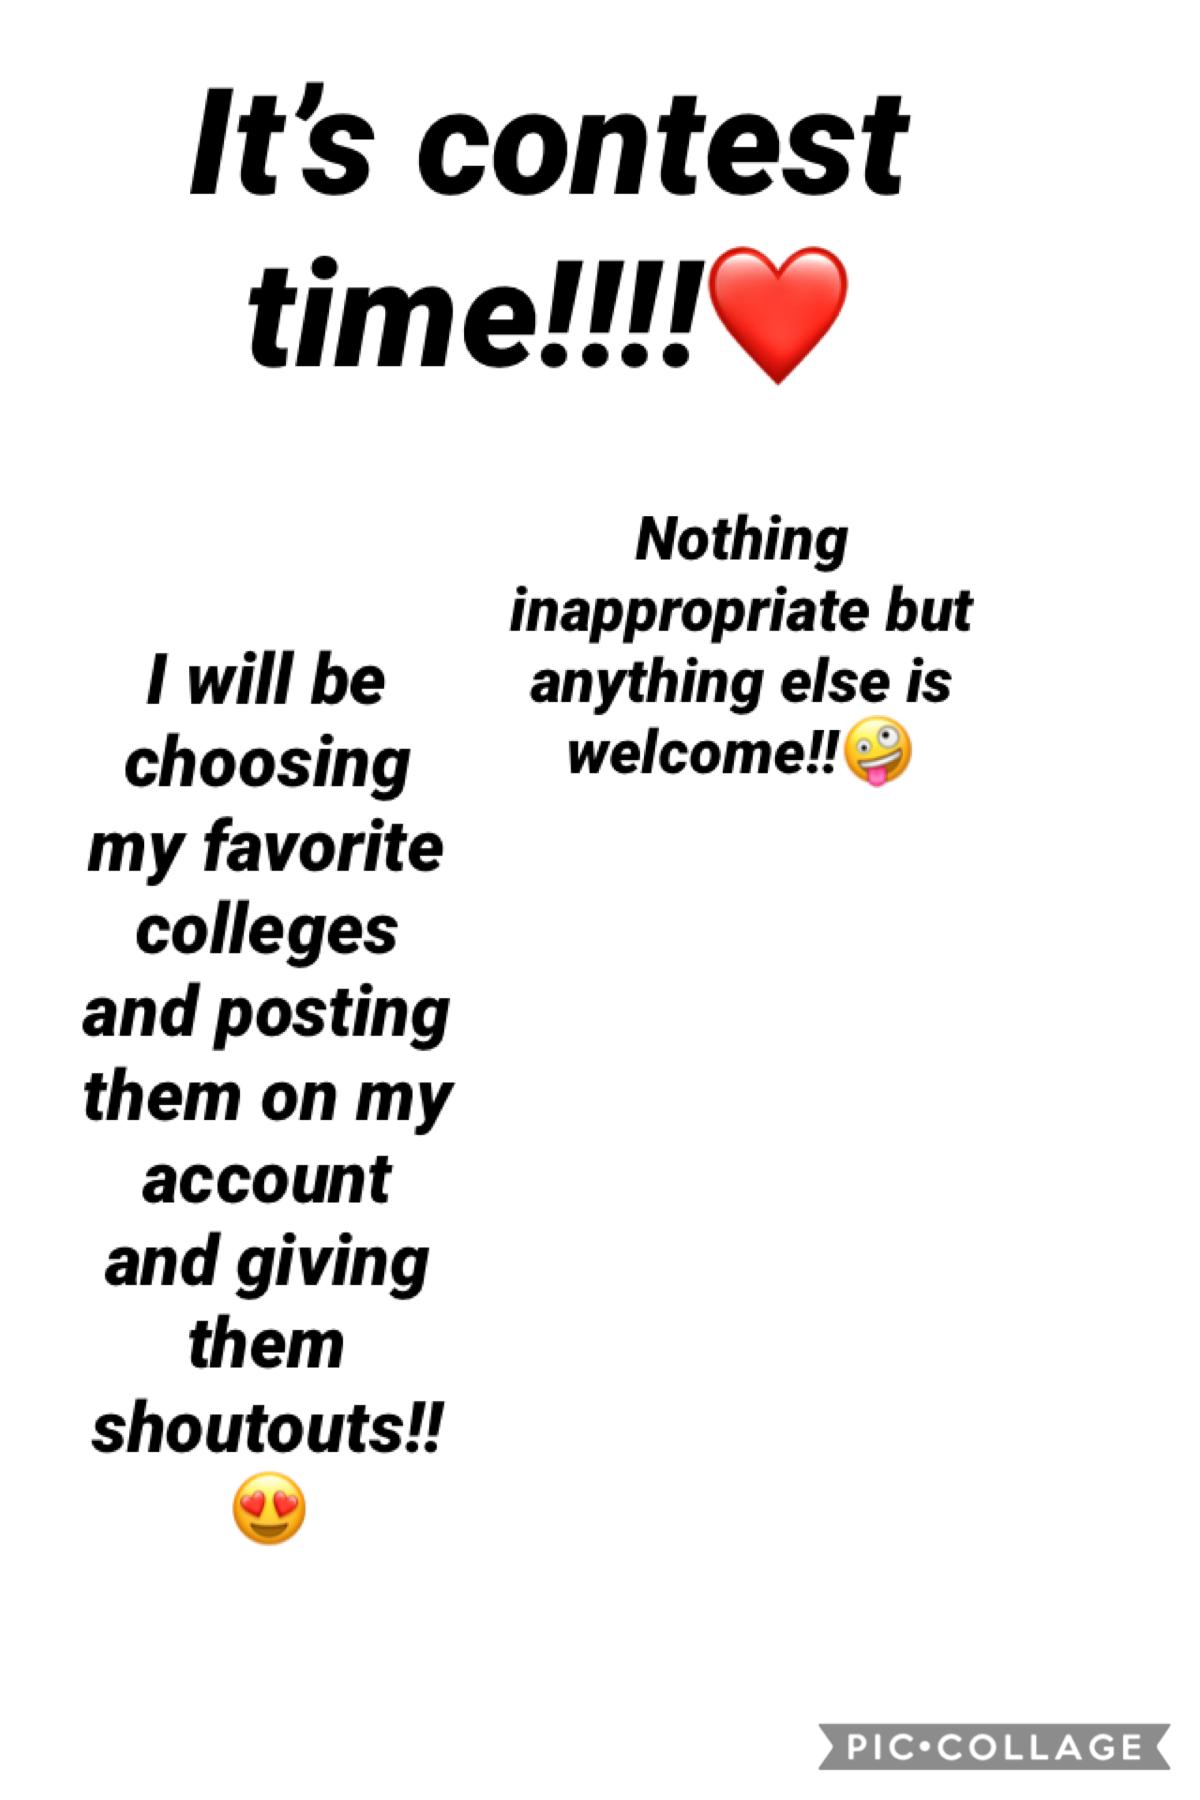 Contest time!!! Sorry I haven’t been active!🤪❤️